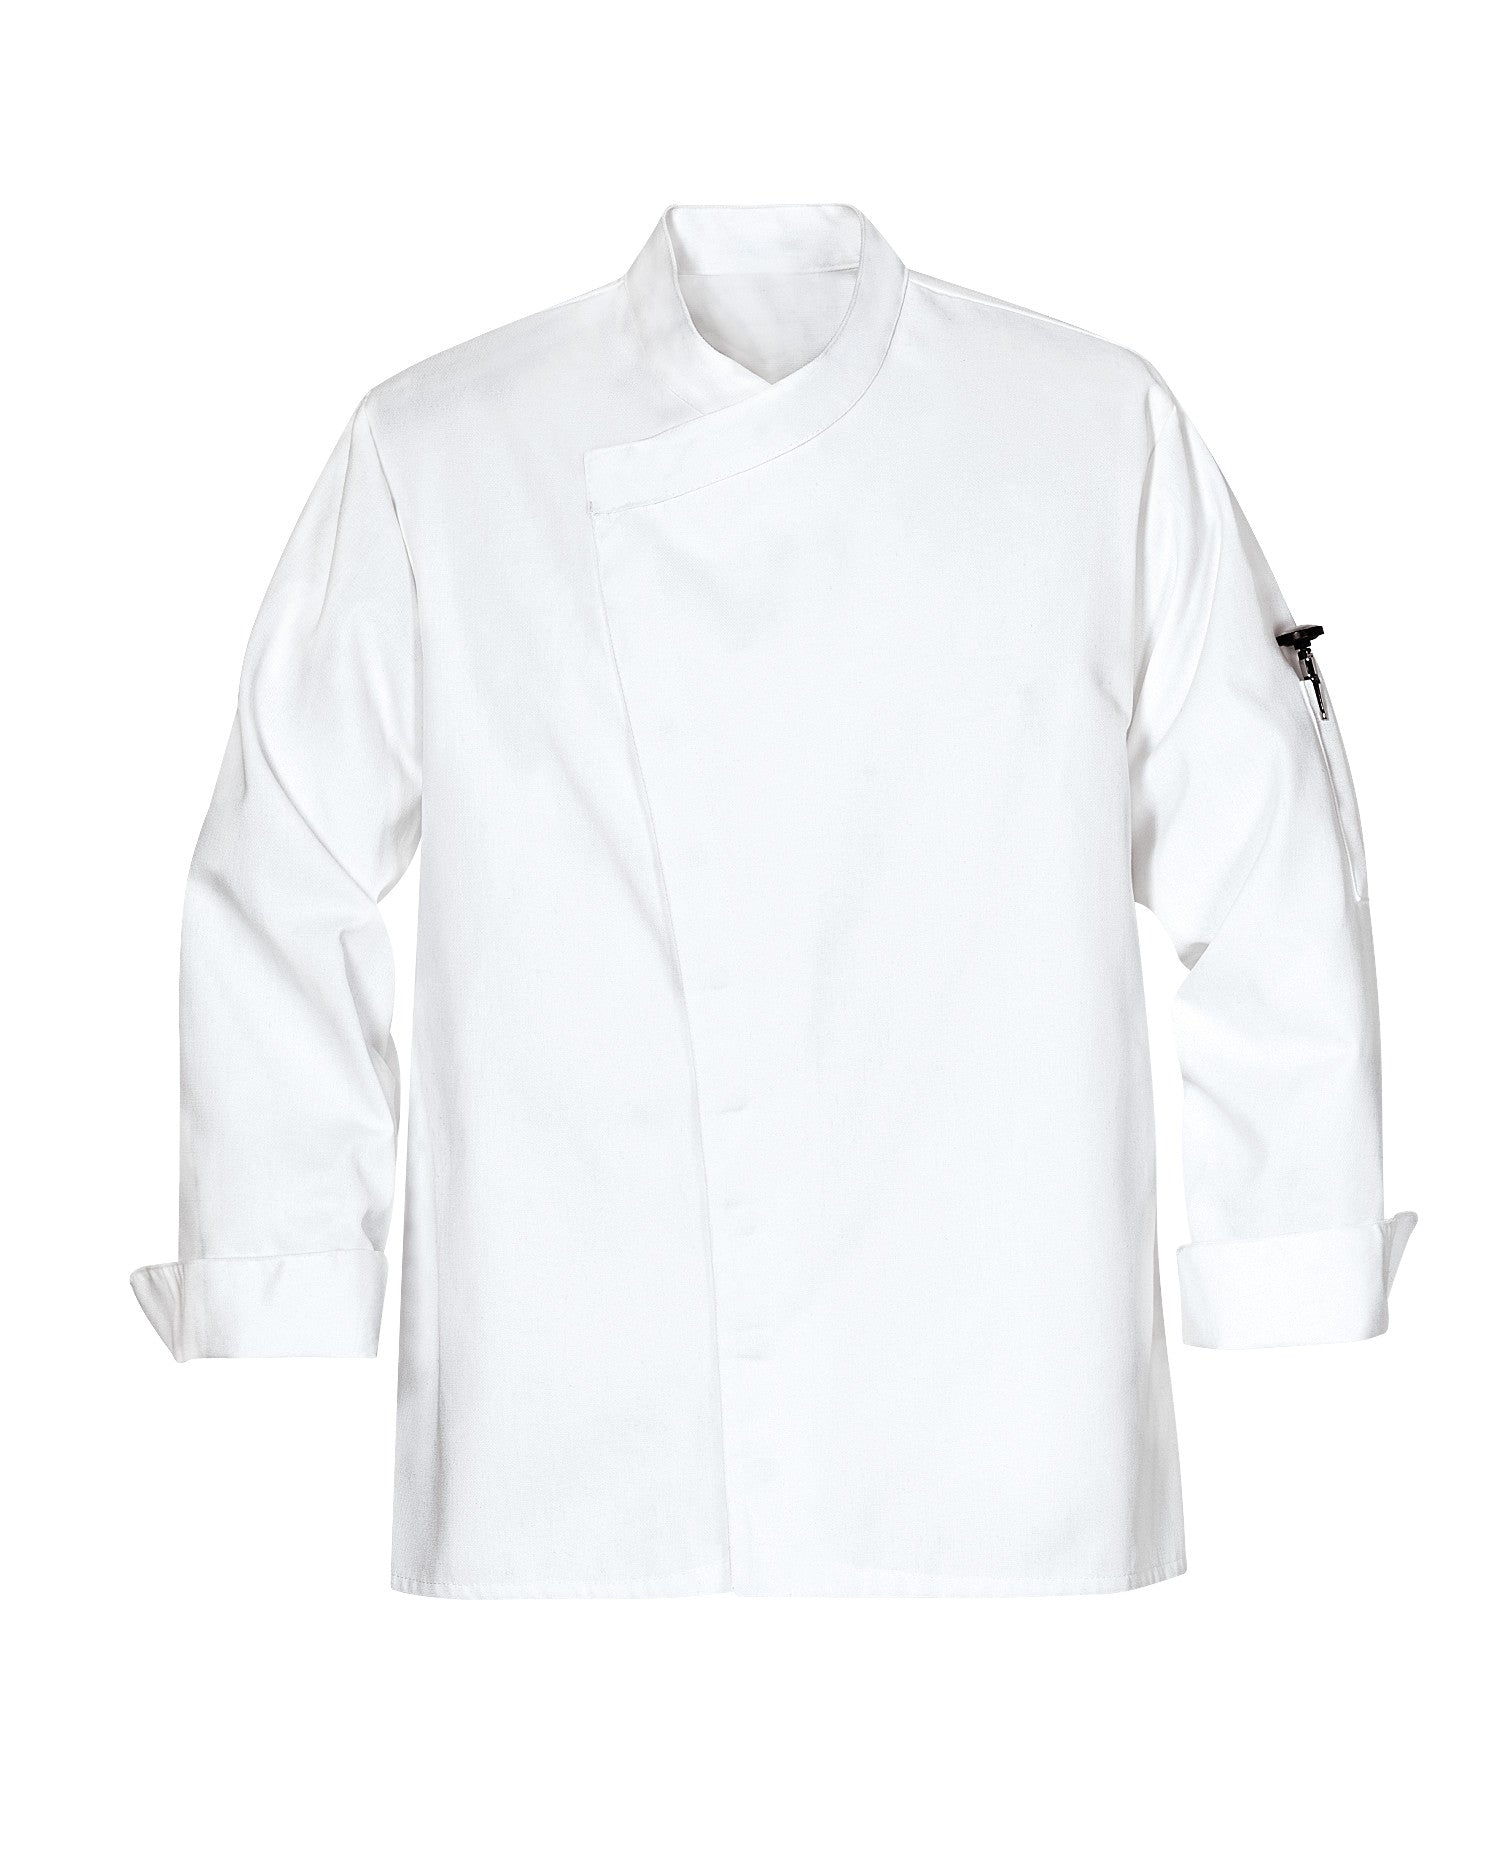 Tunic Chef Coat KT80 - White-eSafety Supplies, Inc